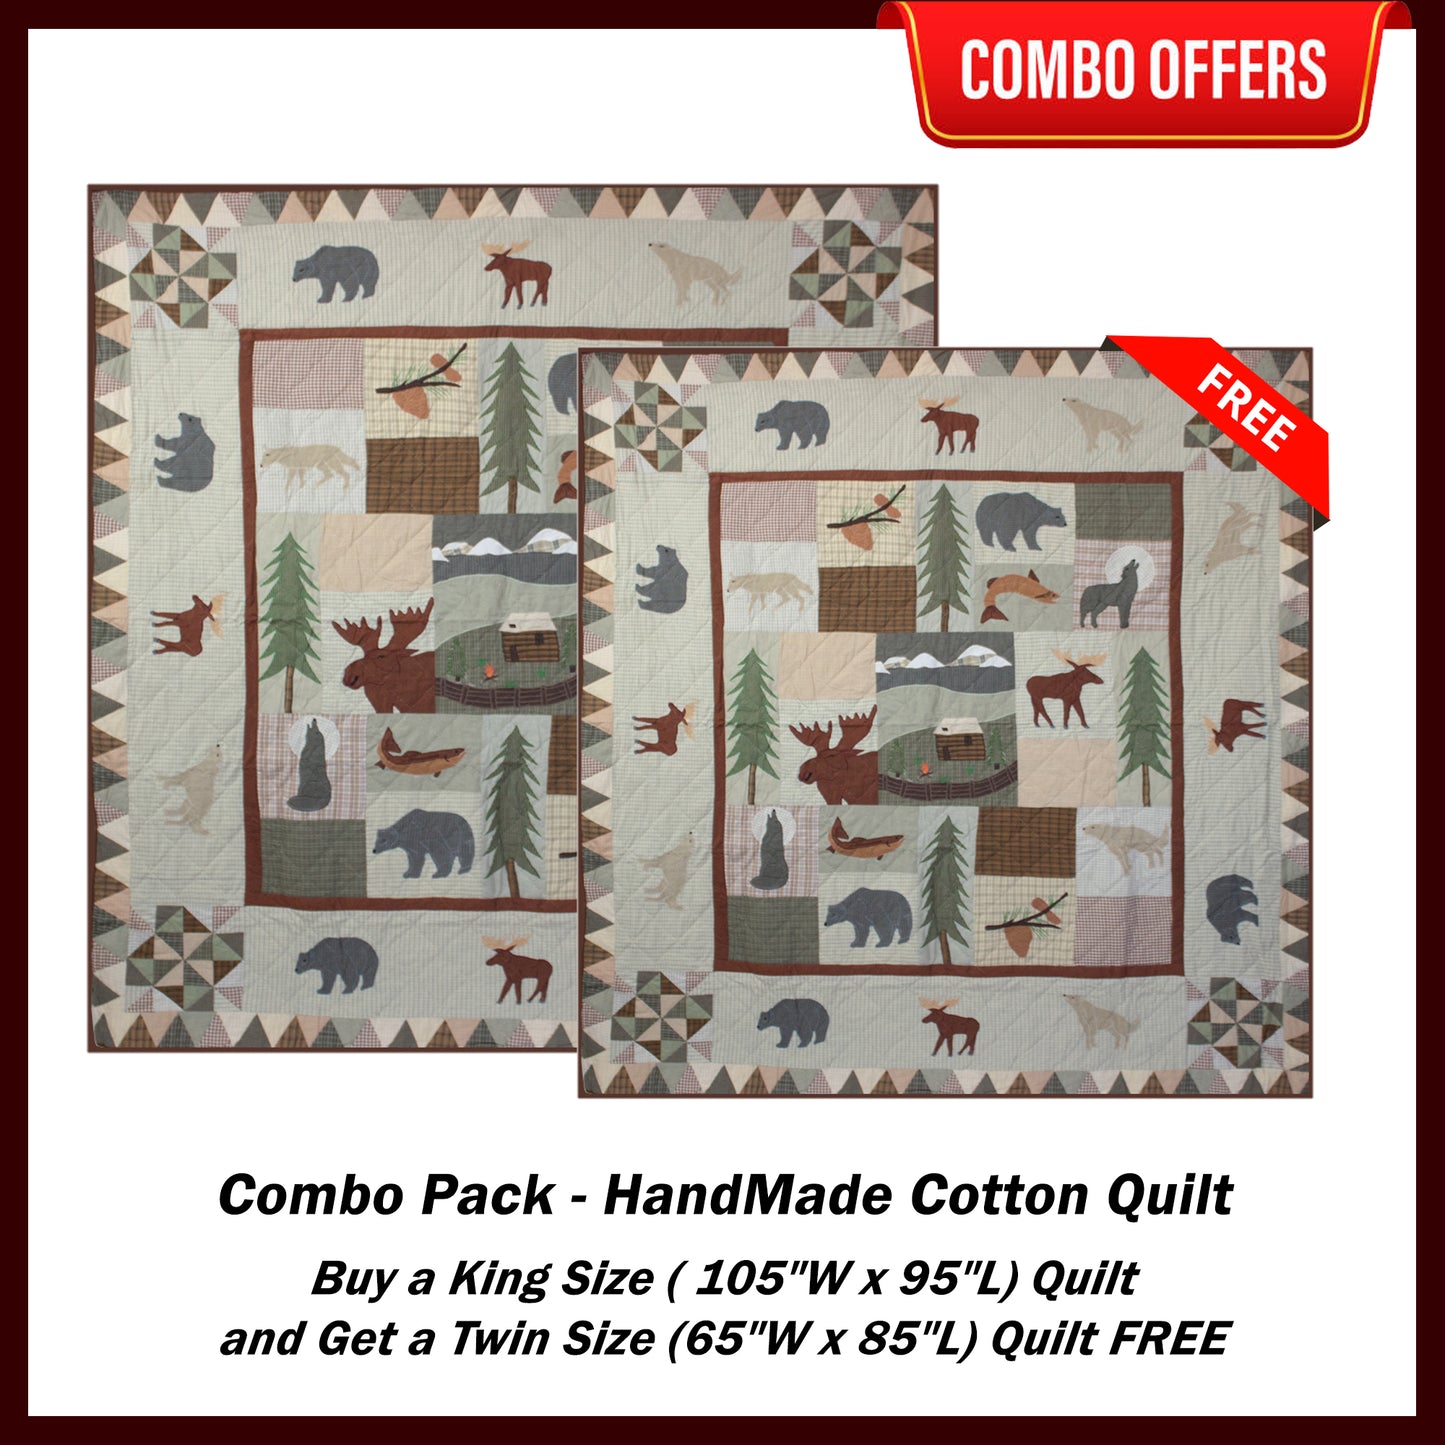 Mountain Whispers Handmade Cotton Quilt - Buy a King Size (or) Queen Size Quilt and Get a Twin Size Quilt FREE